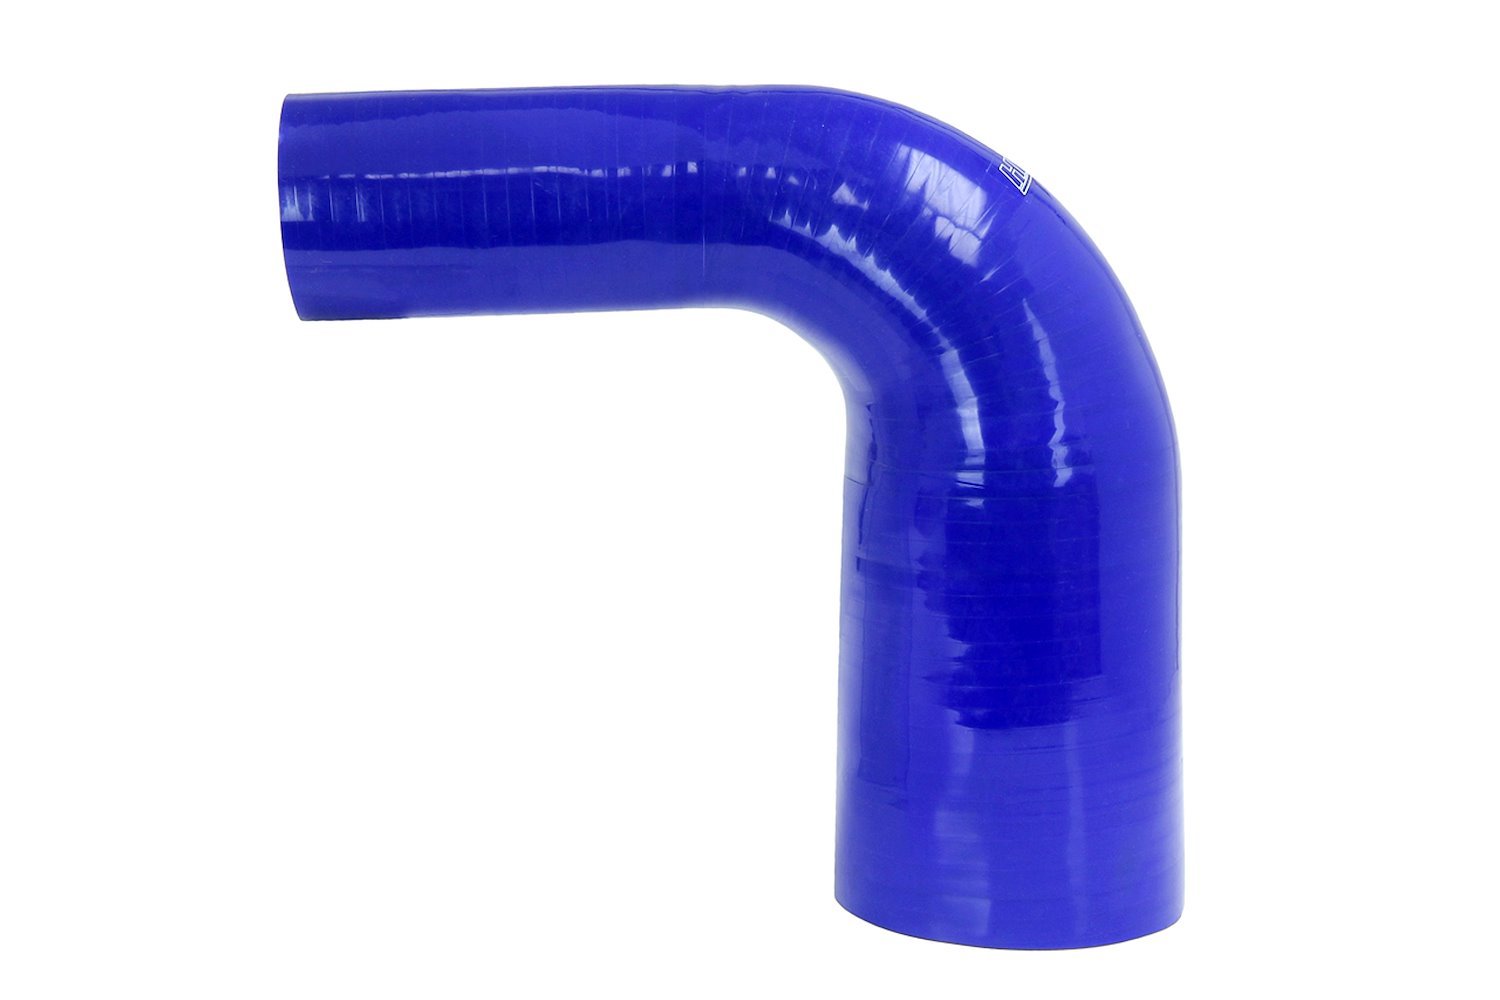 HTSER90-238-312-BLUE Silicone 90-Degree Elbow Hose, High-Temp 4-Ply Reinforced, 2-3/8 in. - 3-1/8 in. ID, Blue